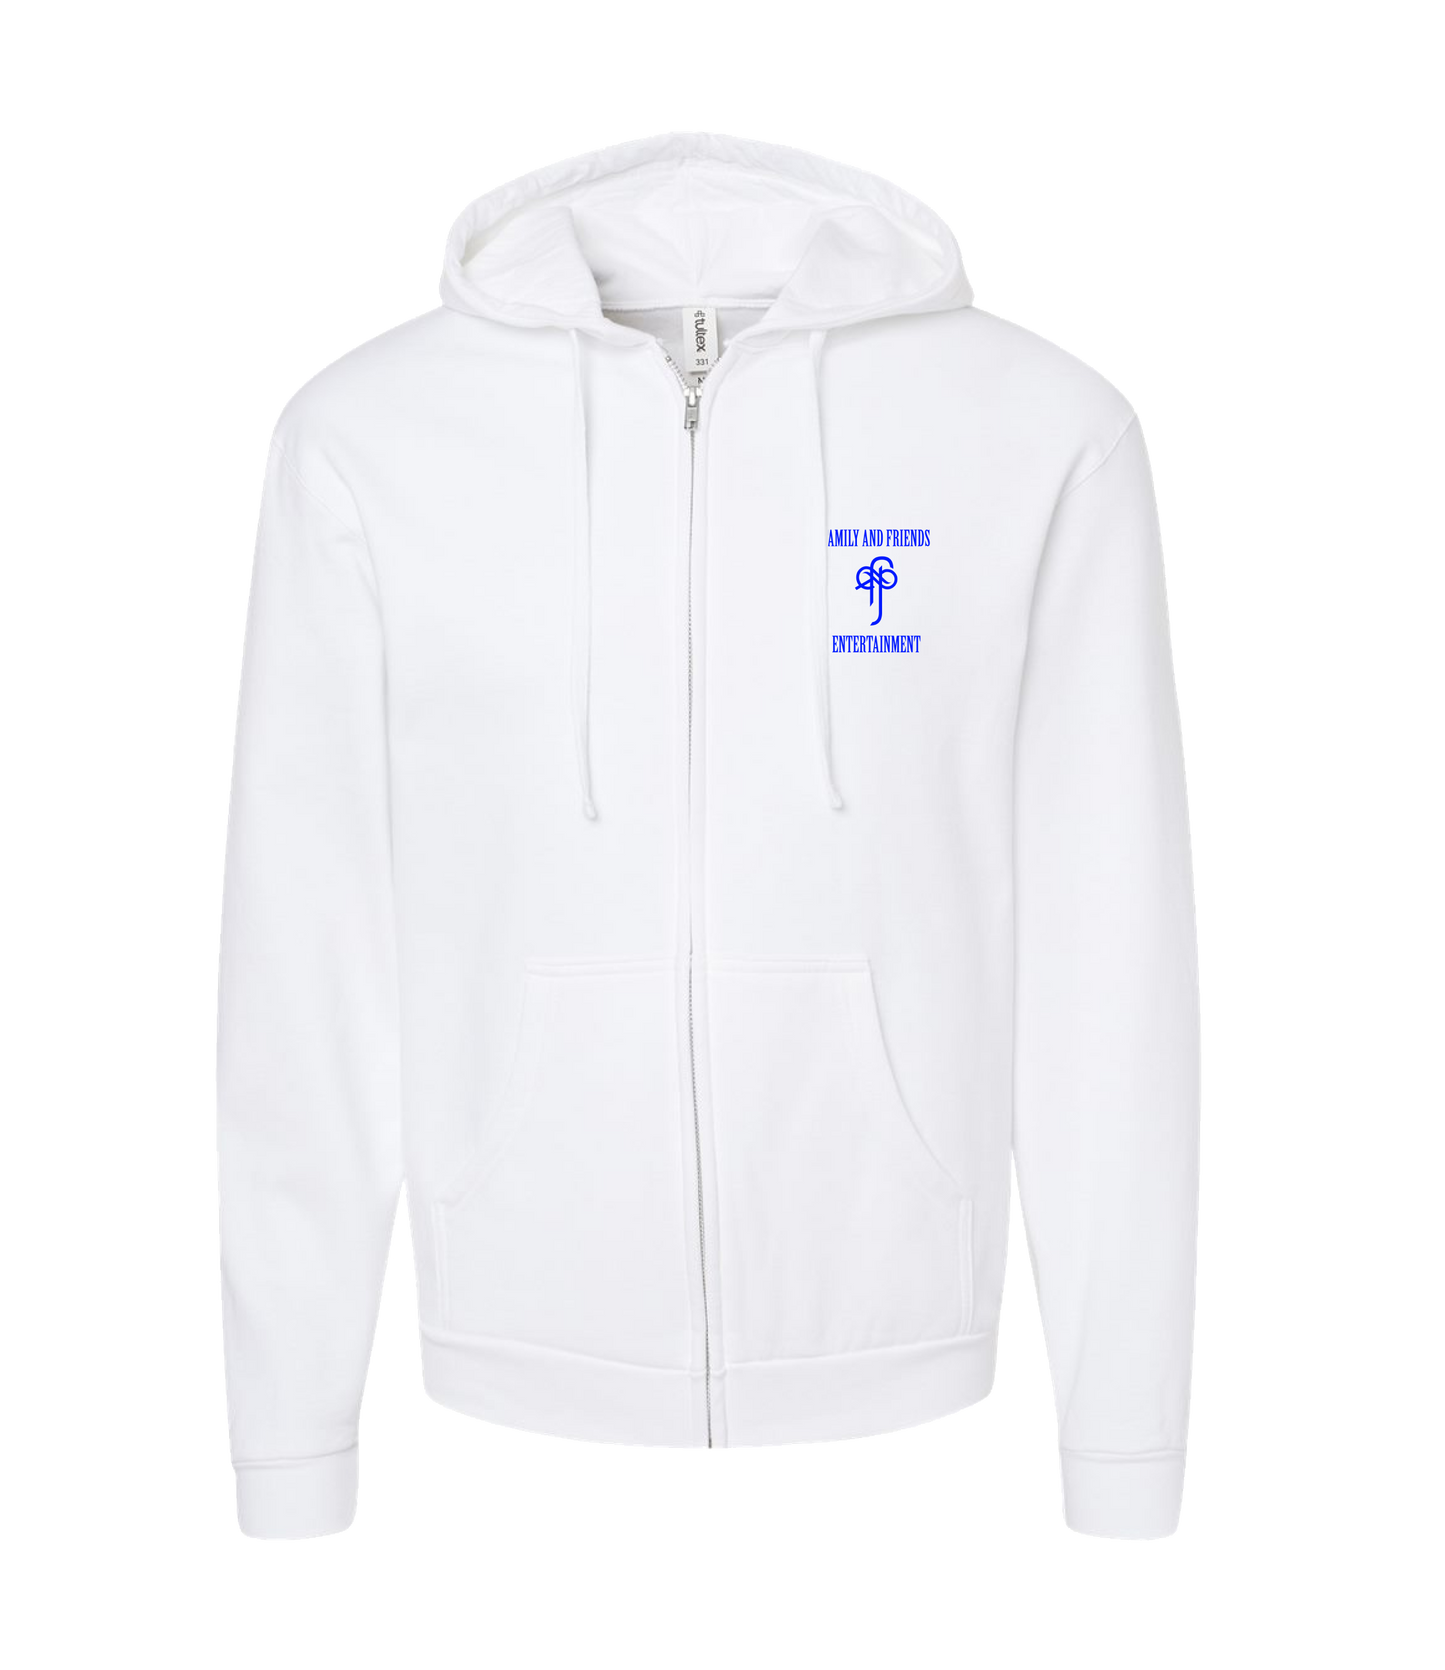 Sincrawford - Family and Friends Ent. (Blue) - White Zip Up Hoodie